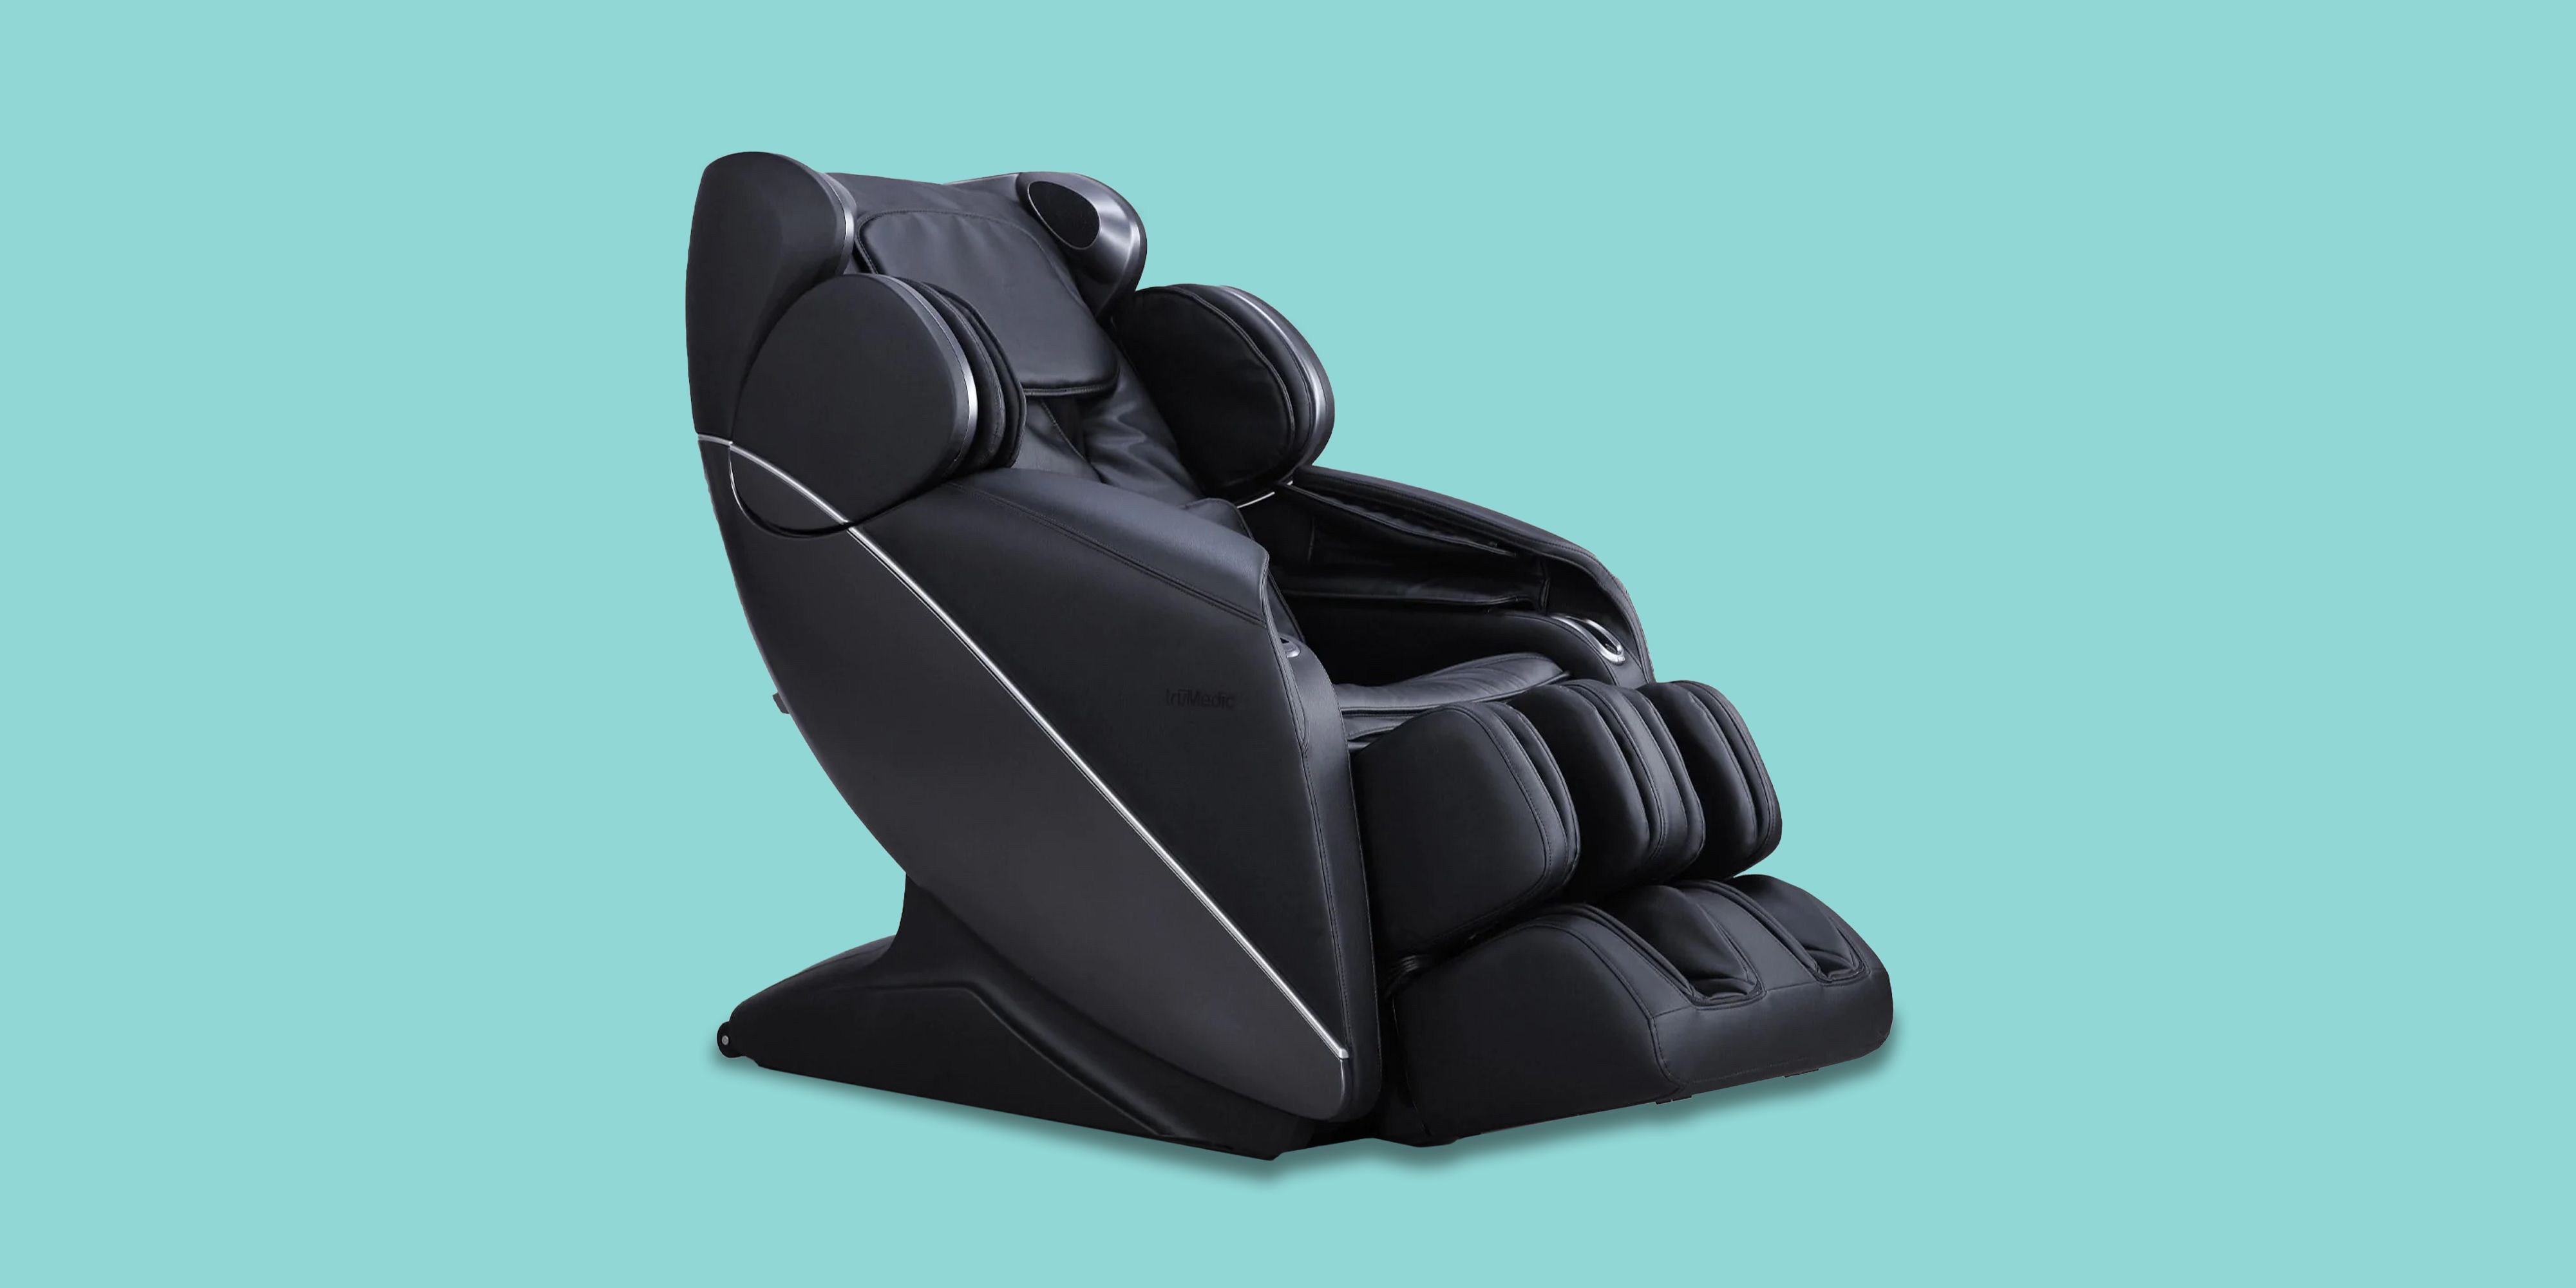 Is the Irest Massage Chair Good for Ultimate Relaxation?